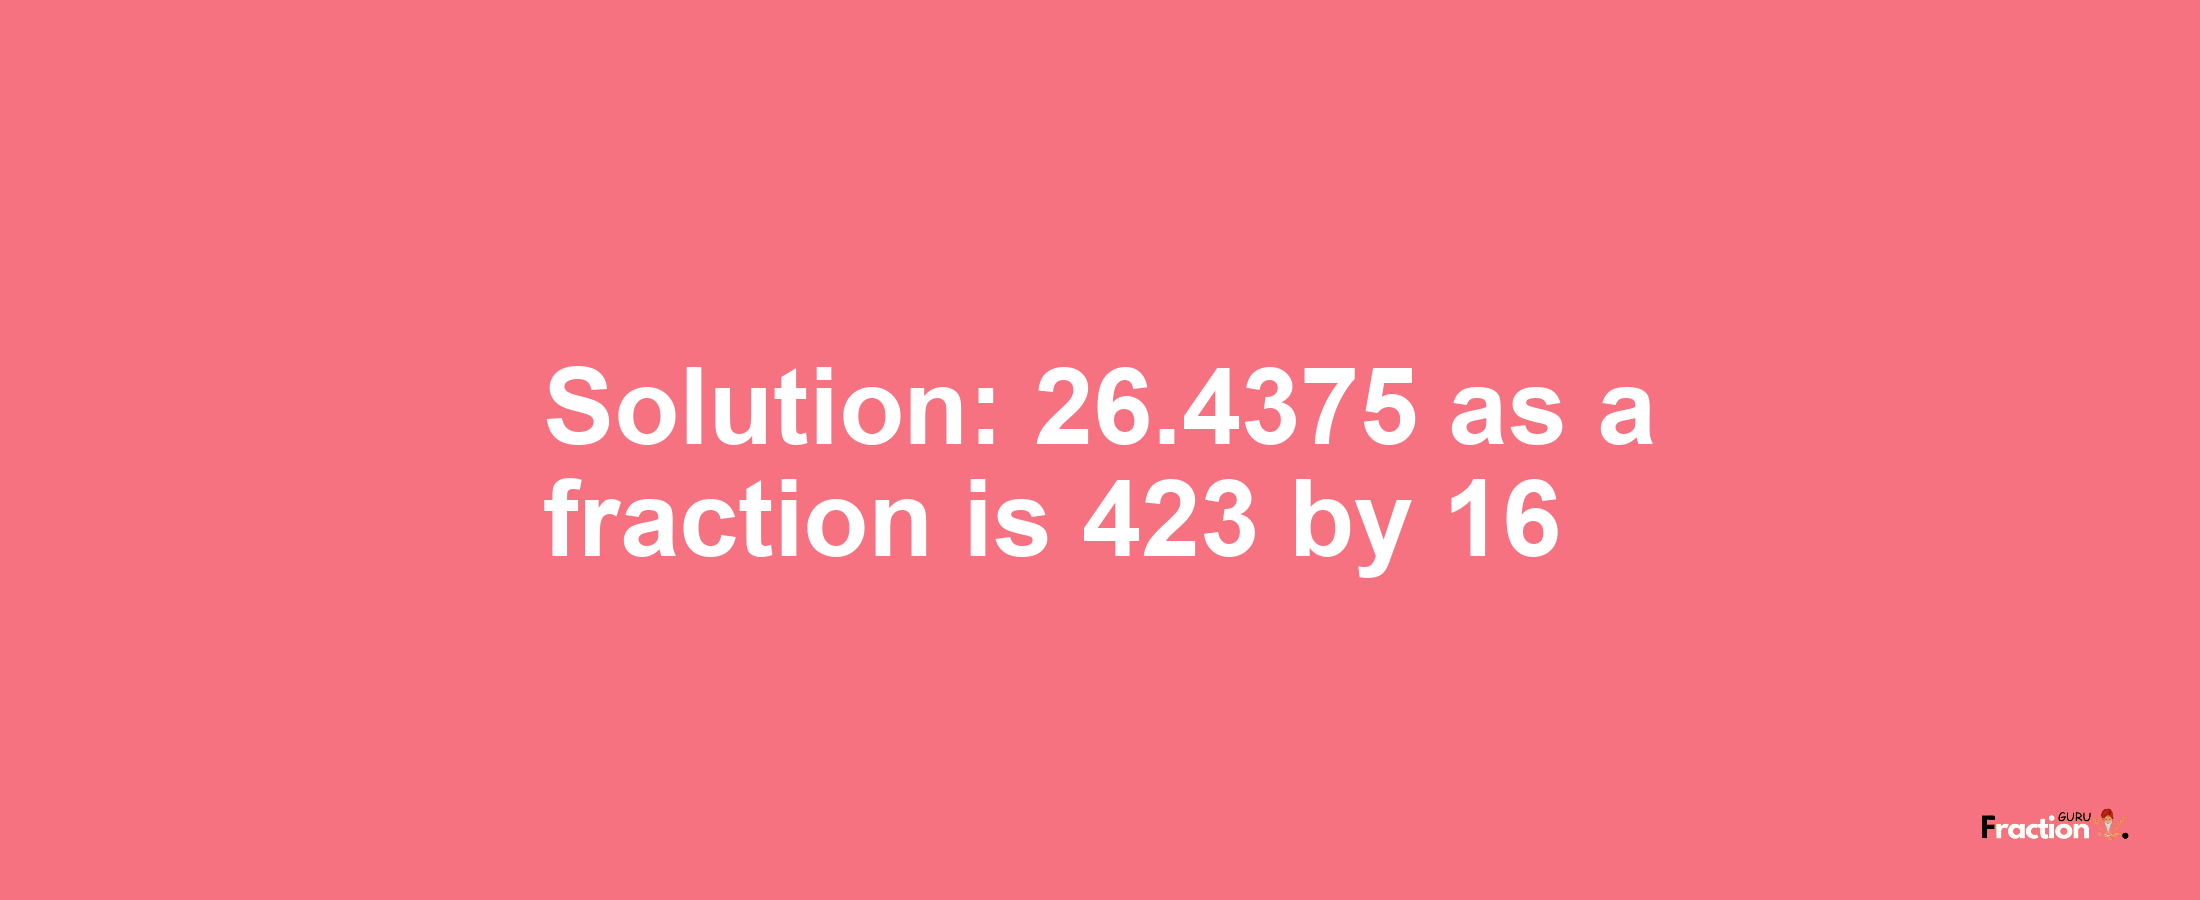 Solution:26.4375 as a fraction is 423/16